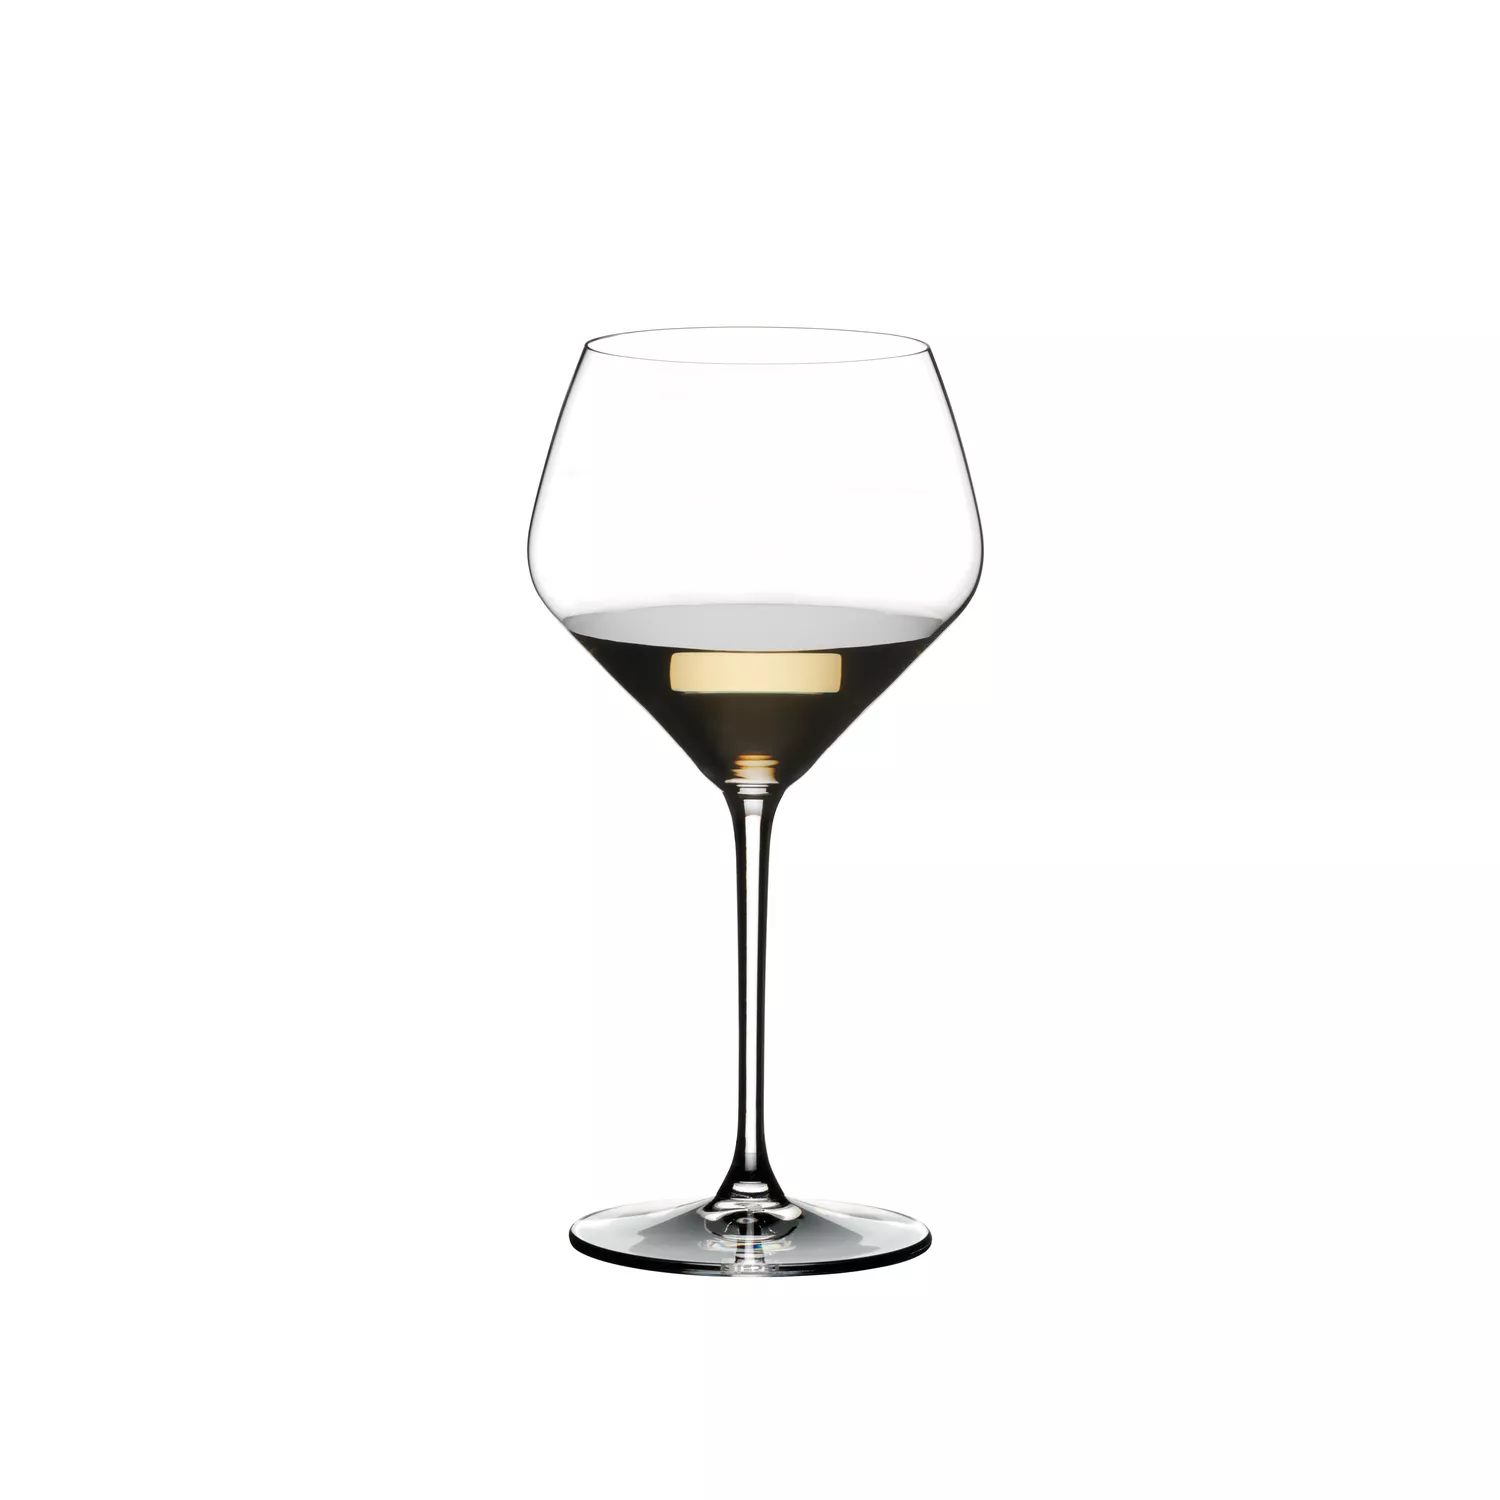 RIEDEL Extreme Oaked Chardonnay Wine Glass, Set of 2